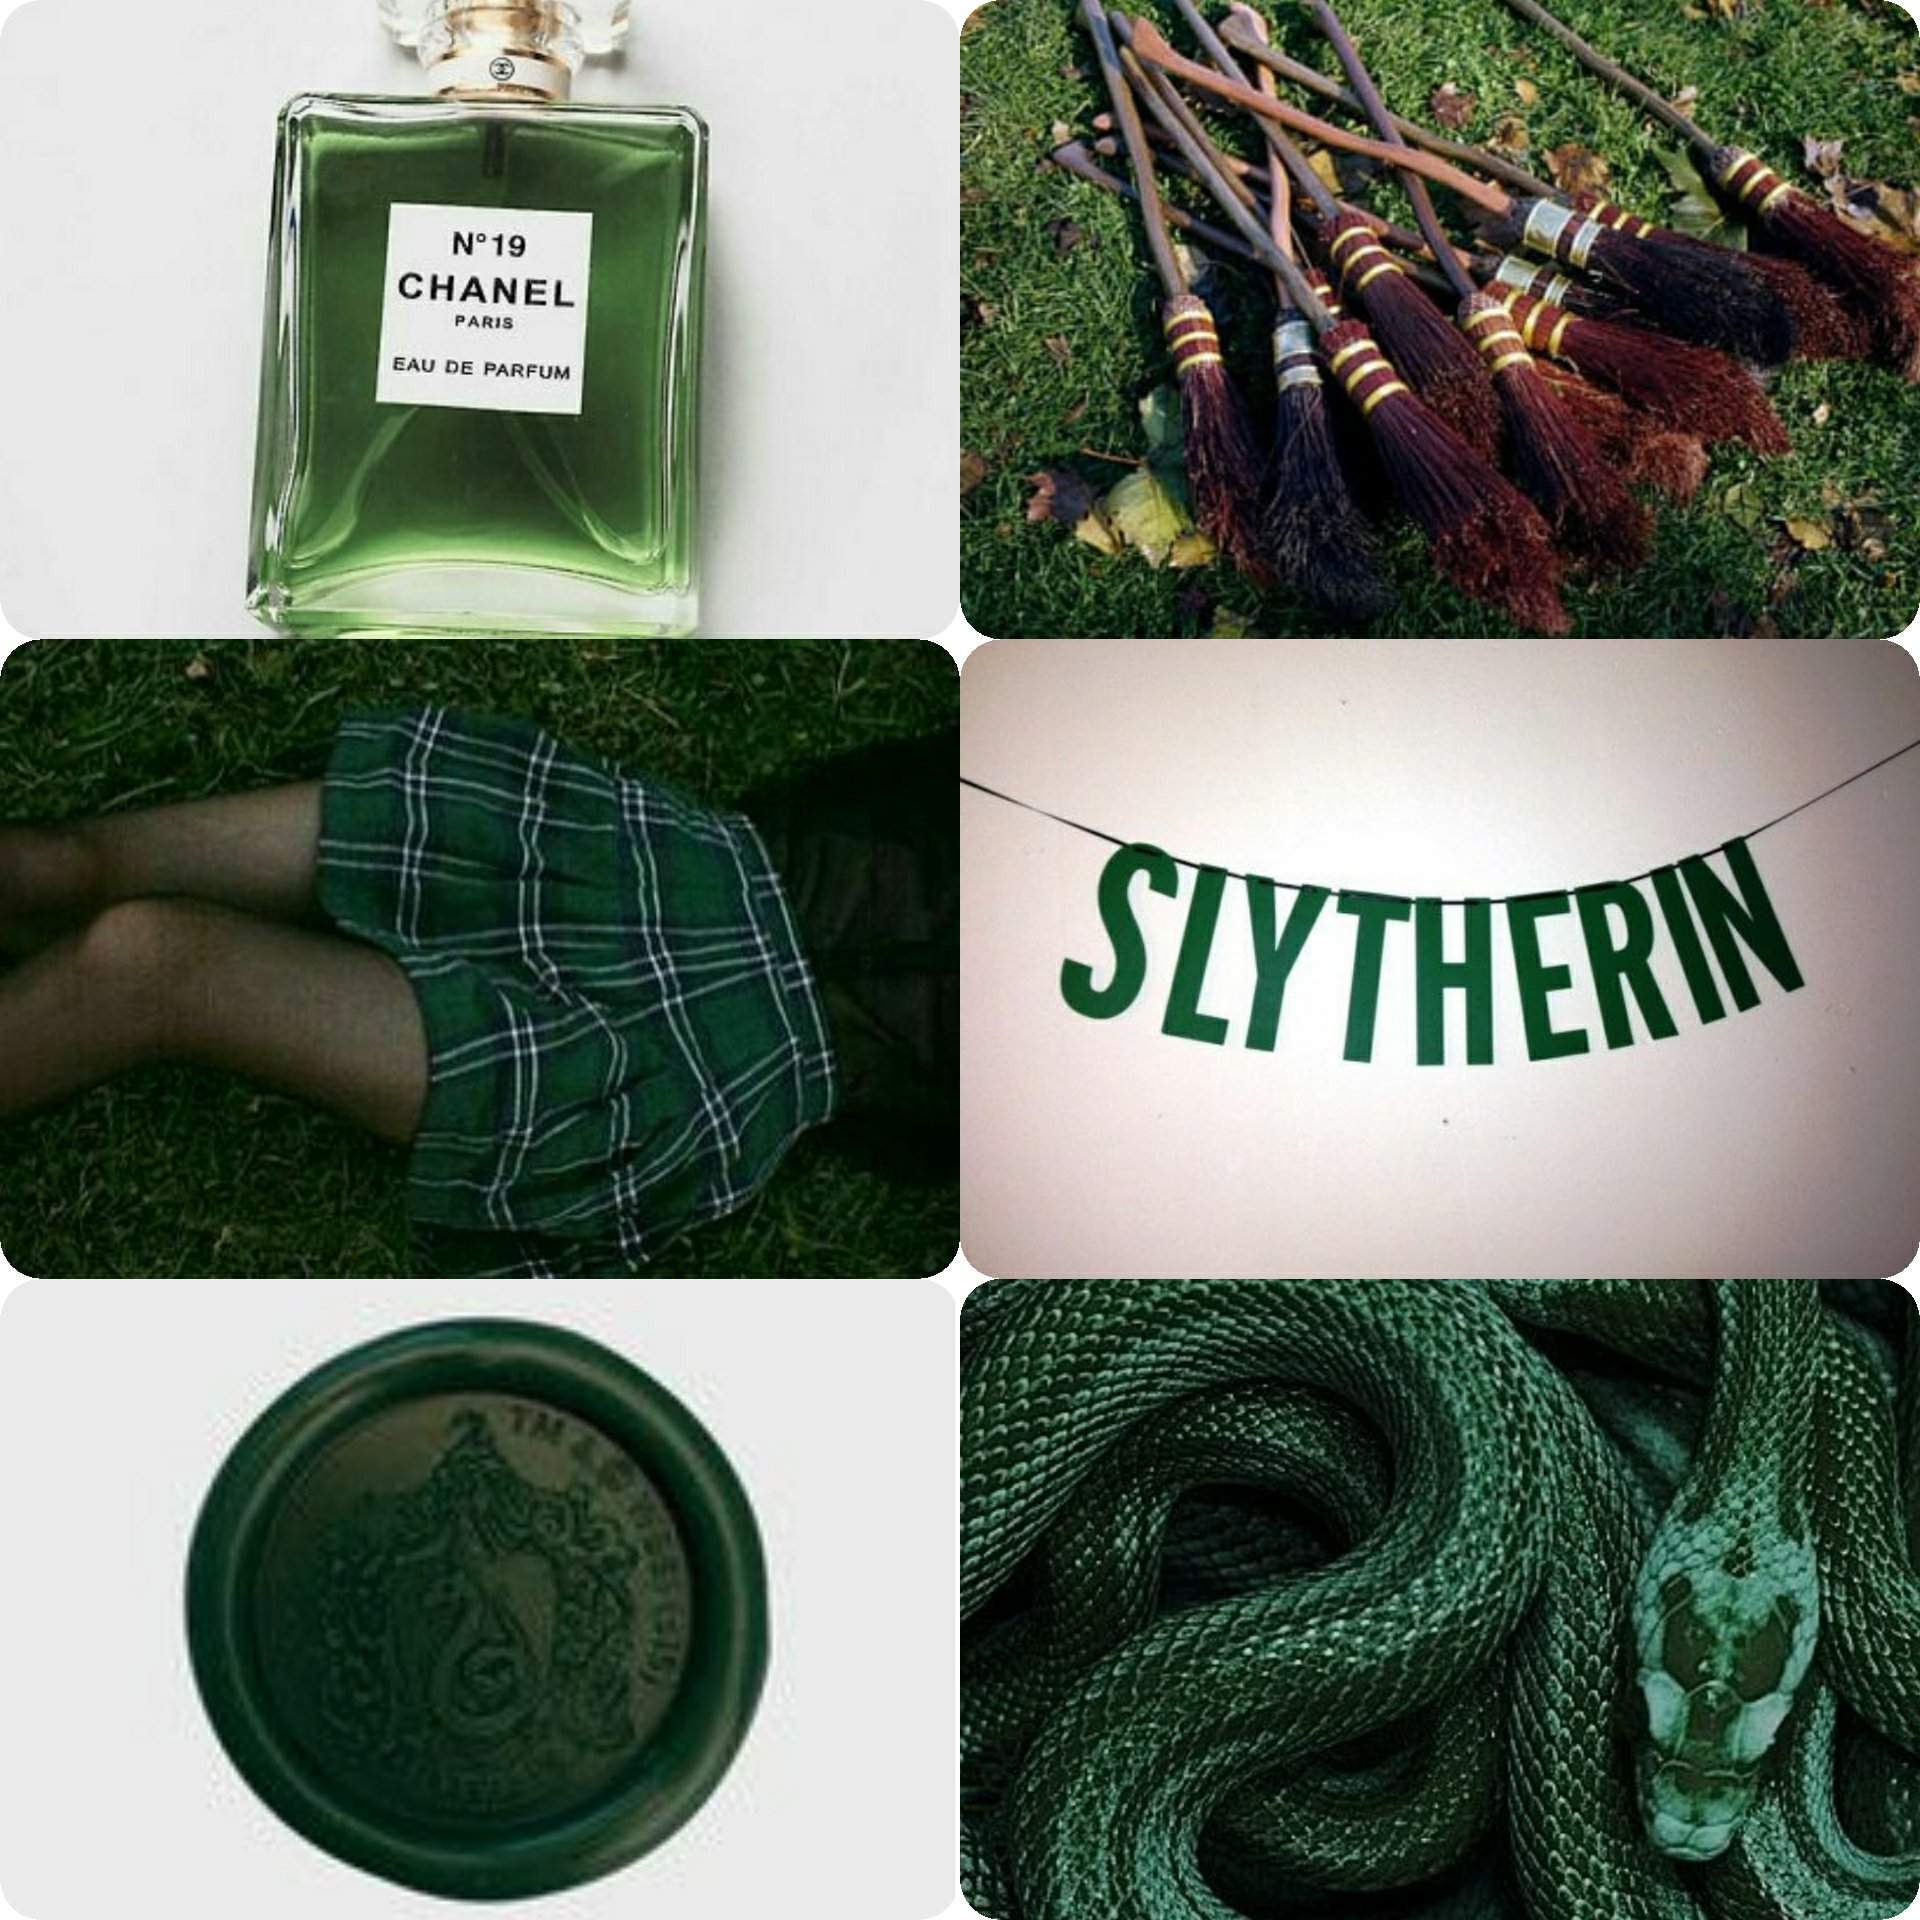 A collage of images representing the aesthetic of the Harry Potter house of Slytherin. - Slytherin